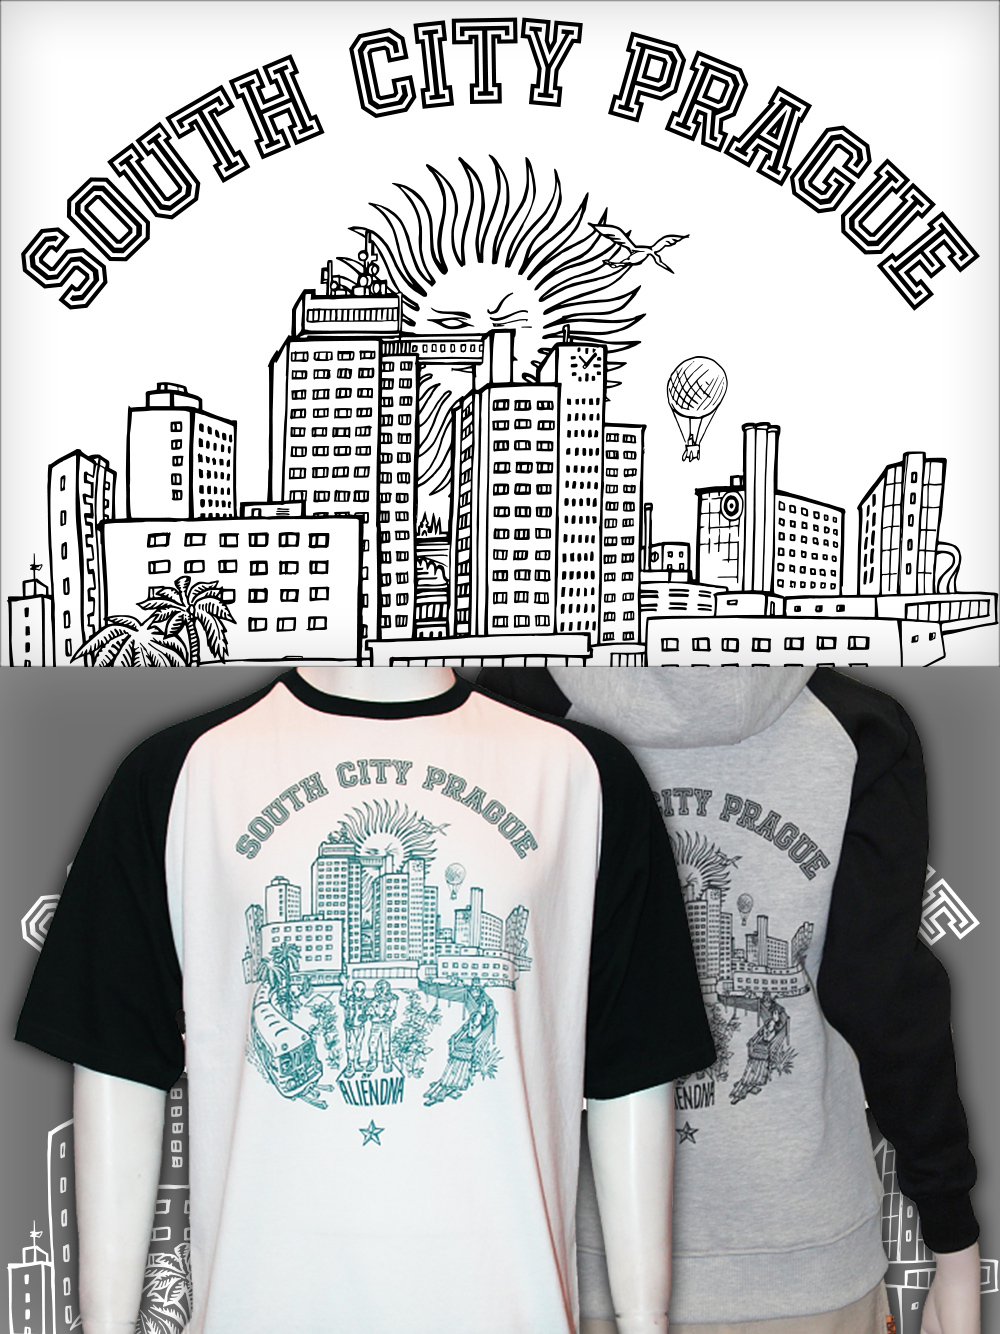 South City Tribute